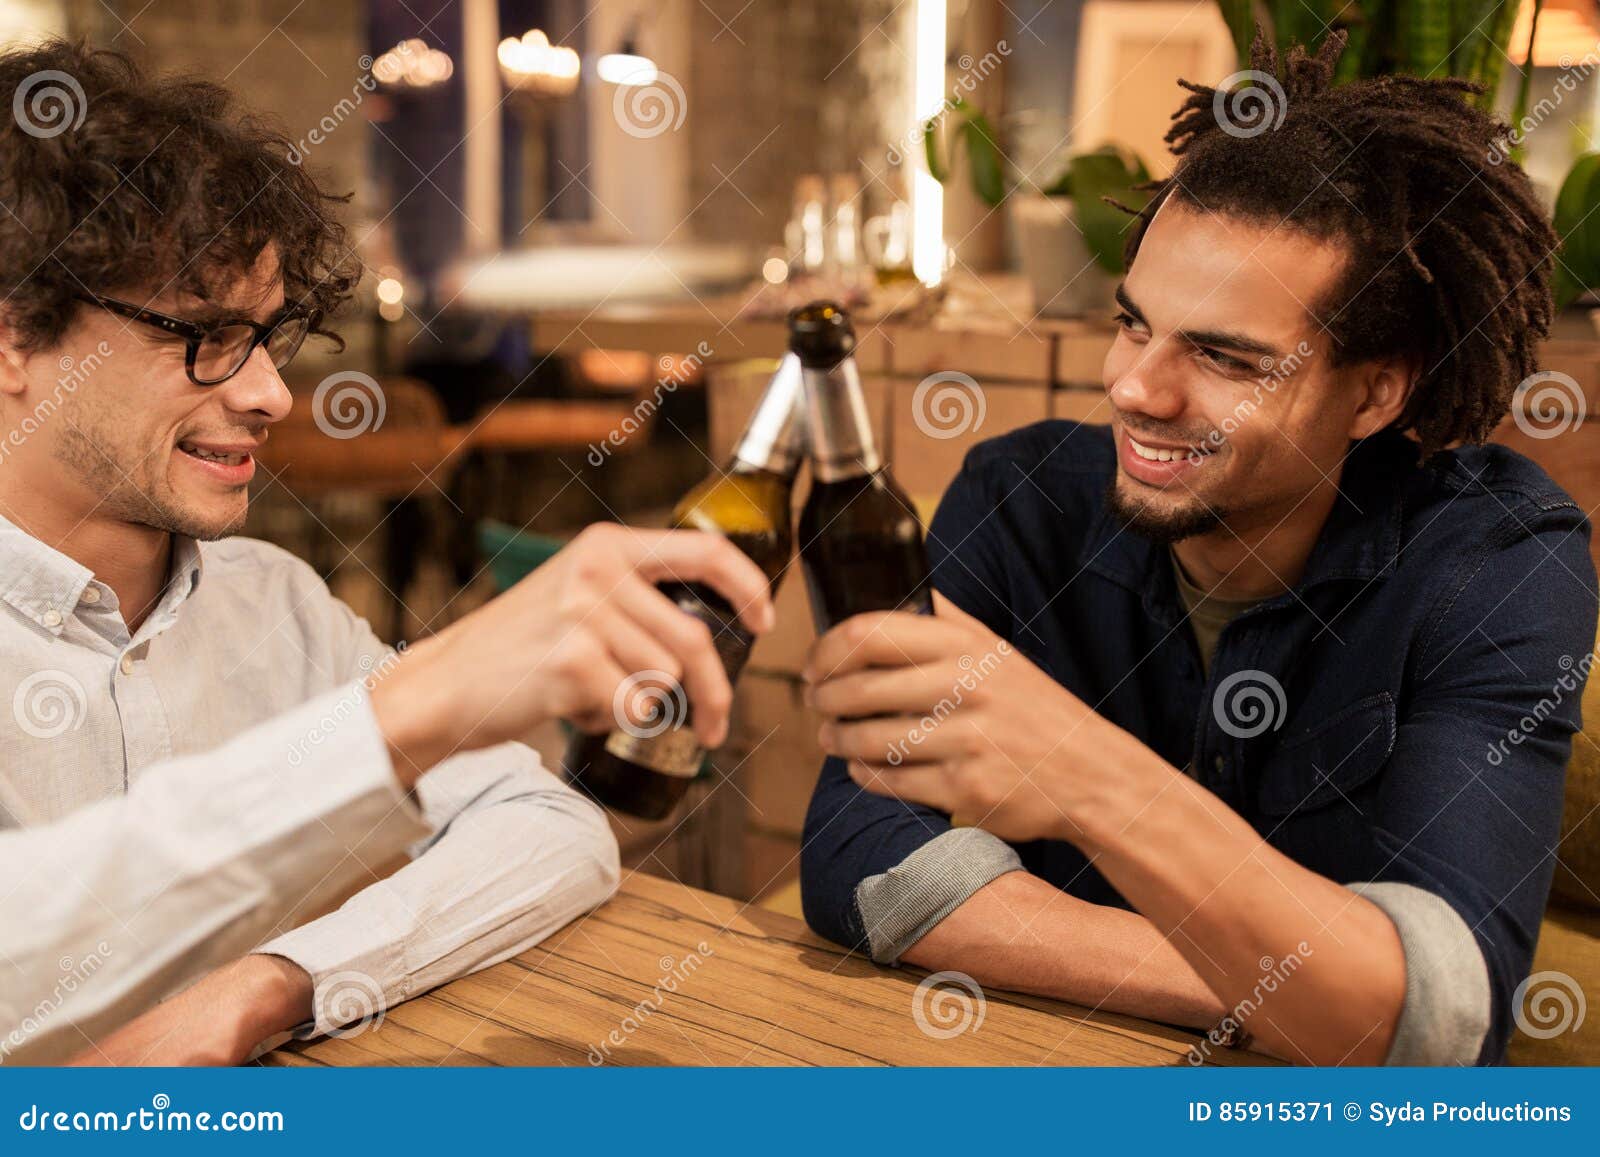 Happy Male Friends Drinking Beer At Bar Or Pub Stock Image ...